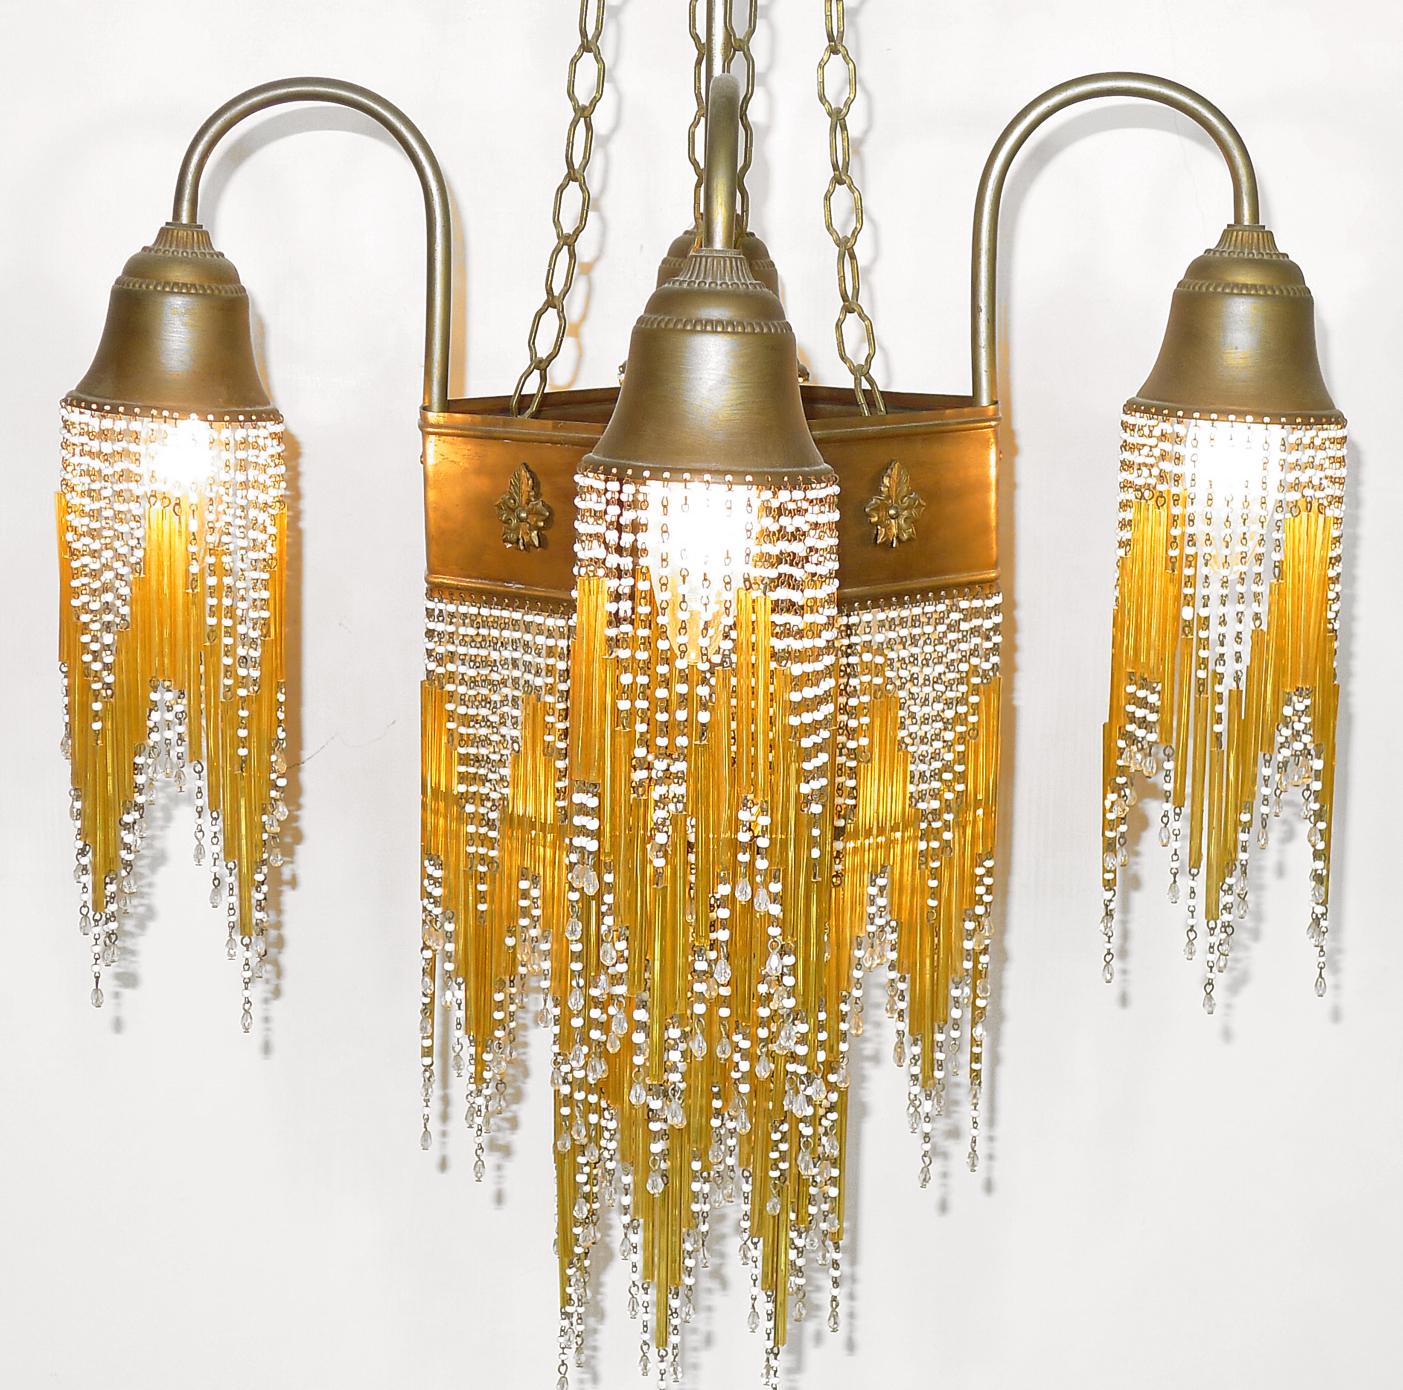 Fabulous midcentury in clear and amber beaded glass Art Deco or Art Nouveau chandelier.
Measures:
Width 16 in / 40 cm
Diagonal 20 in / 50 cm
Height 38 in / 96 cm
Five light bulbs E14/ good working condition/European wiring.
Age patina.